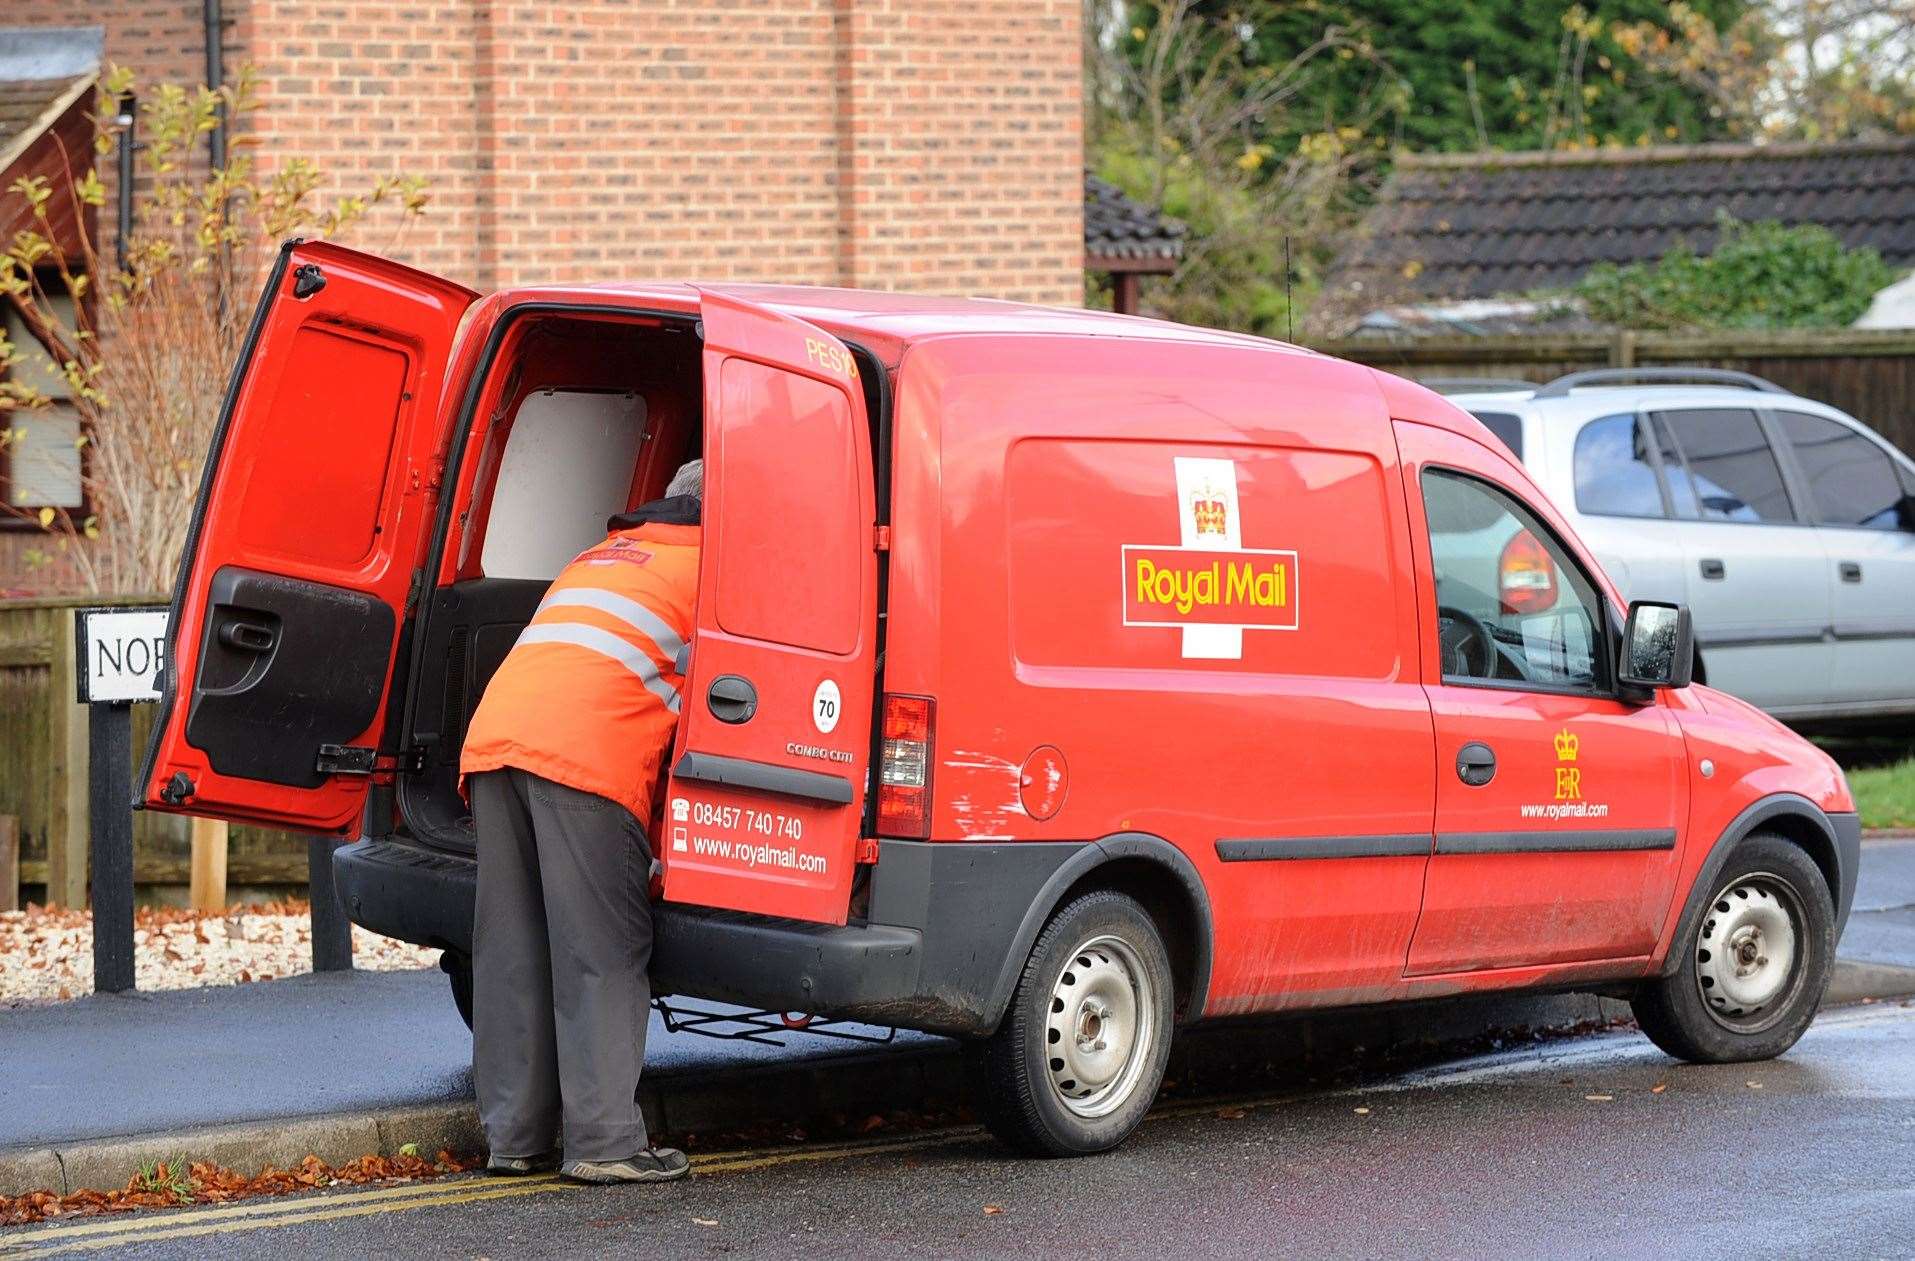 There have been more than 2,000 attacks on Royal Mail workers since last March